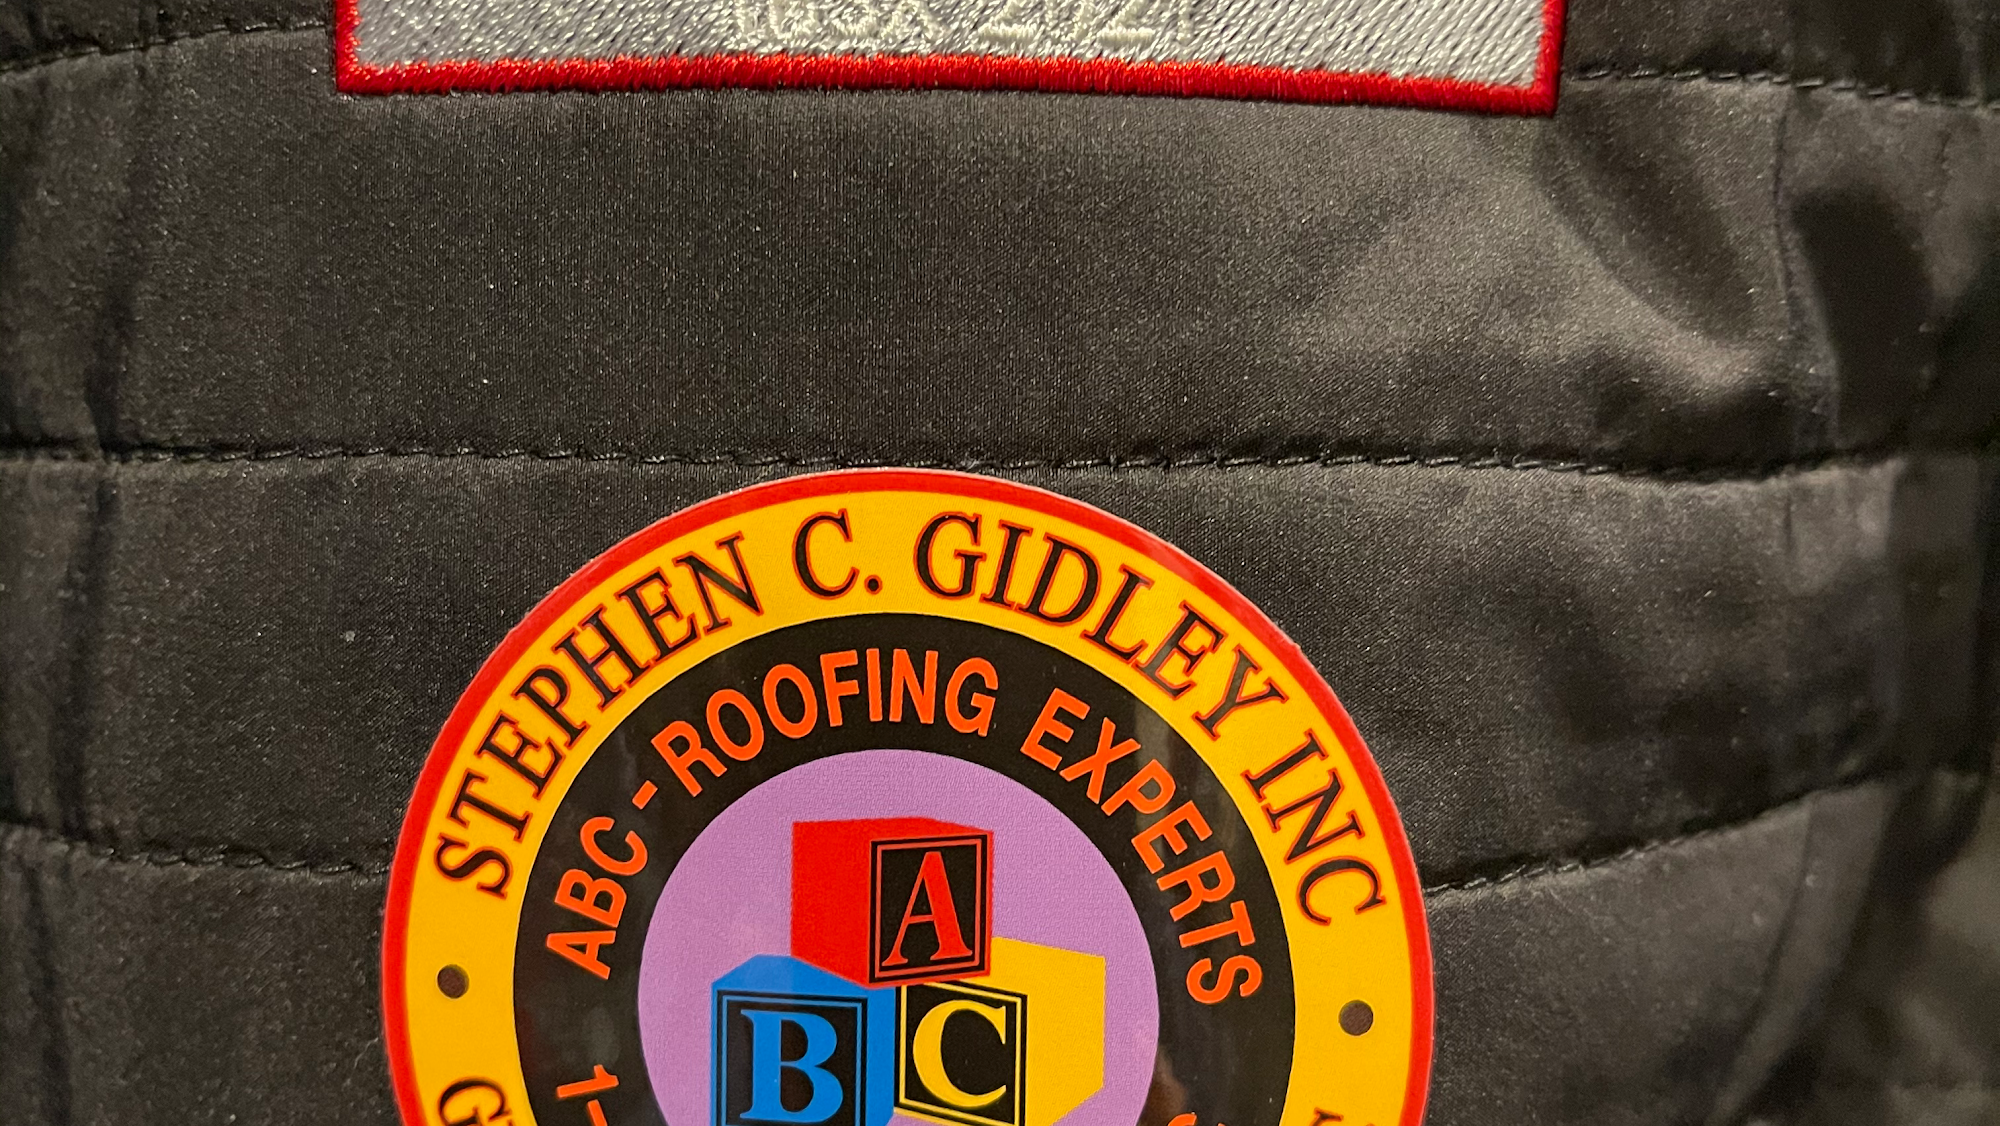 ABC-THE ROOFING EXPERTS.COM www.ABCTHEROOFINGEXPERTS.COM.